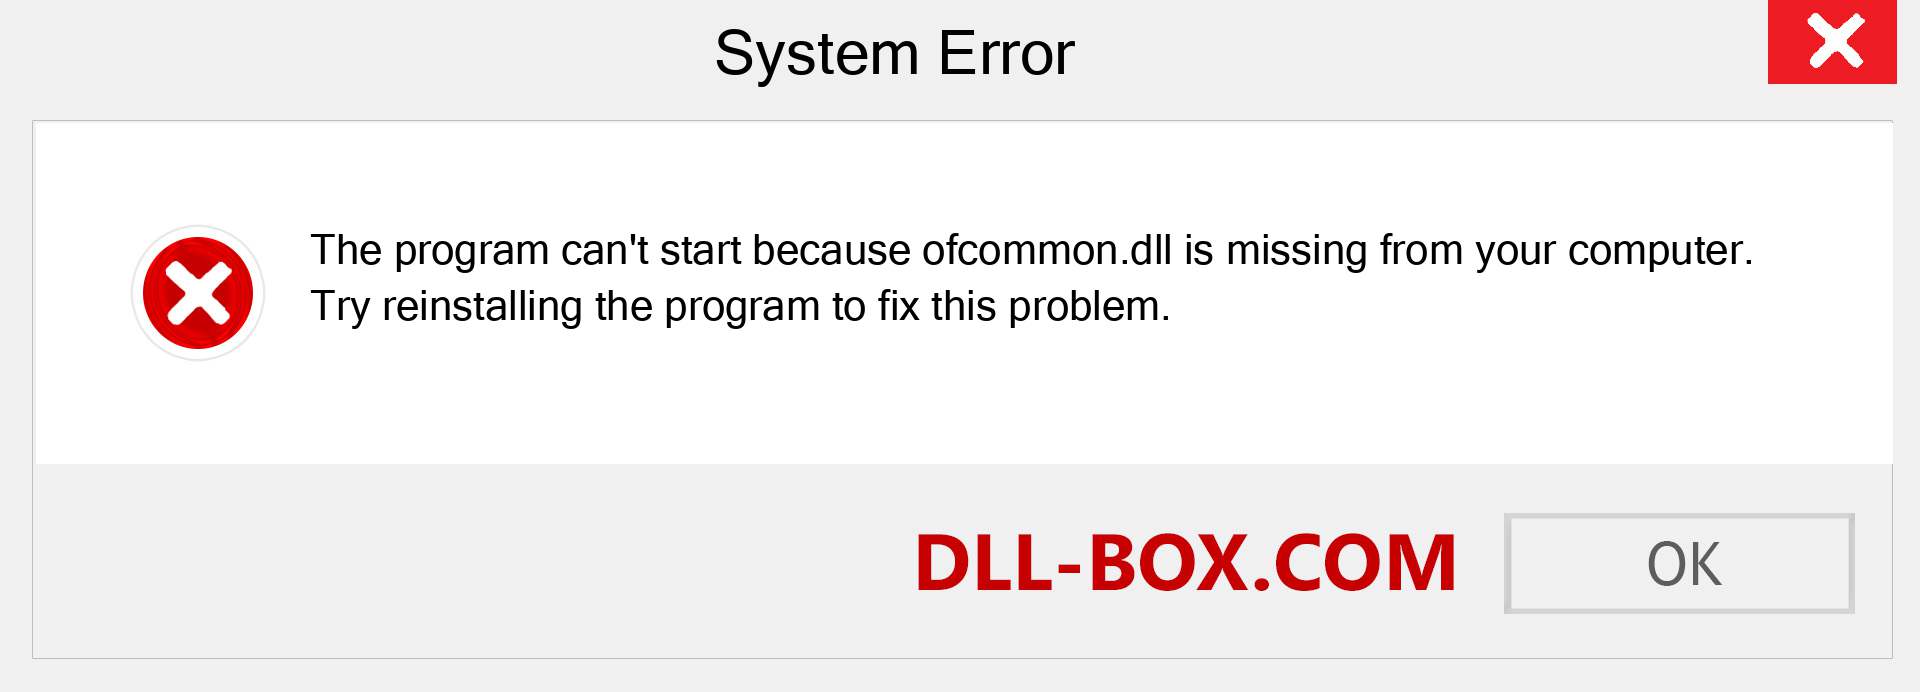  ofcommon.dll file is missing?. Download for Windows 7, 8, 10 - Fix  ofcommon dll Missing Error on Windows, photos, images